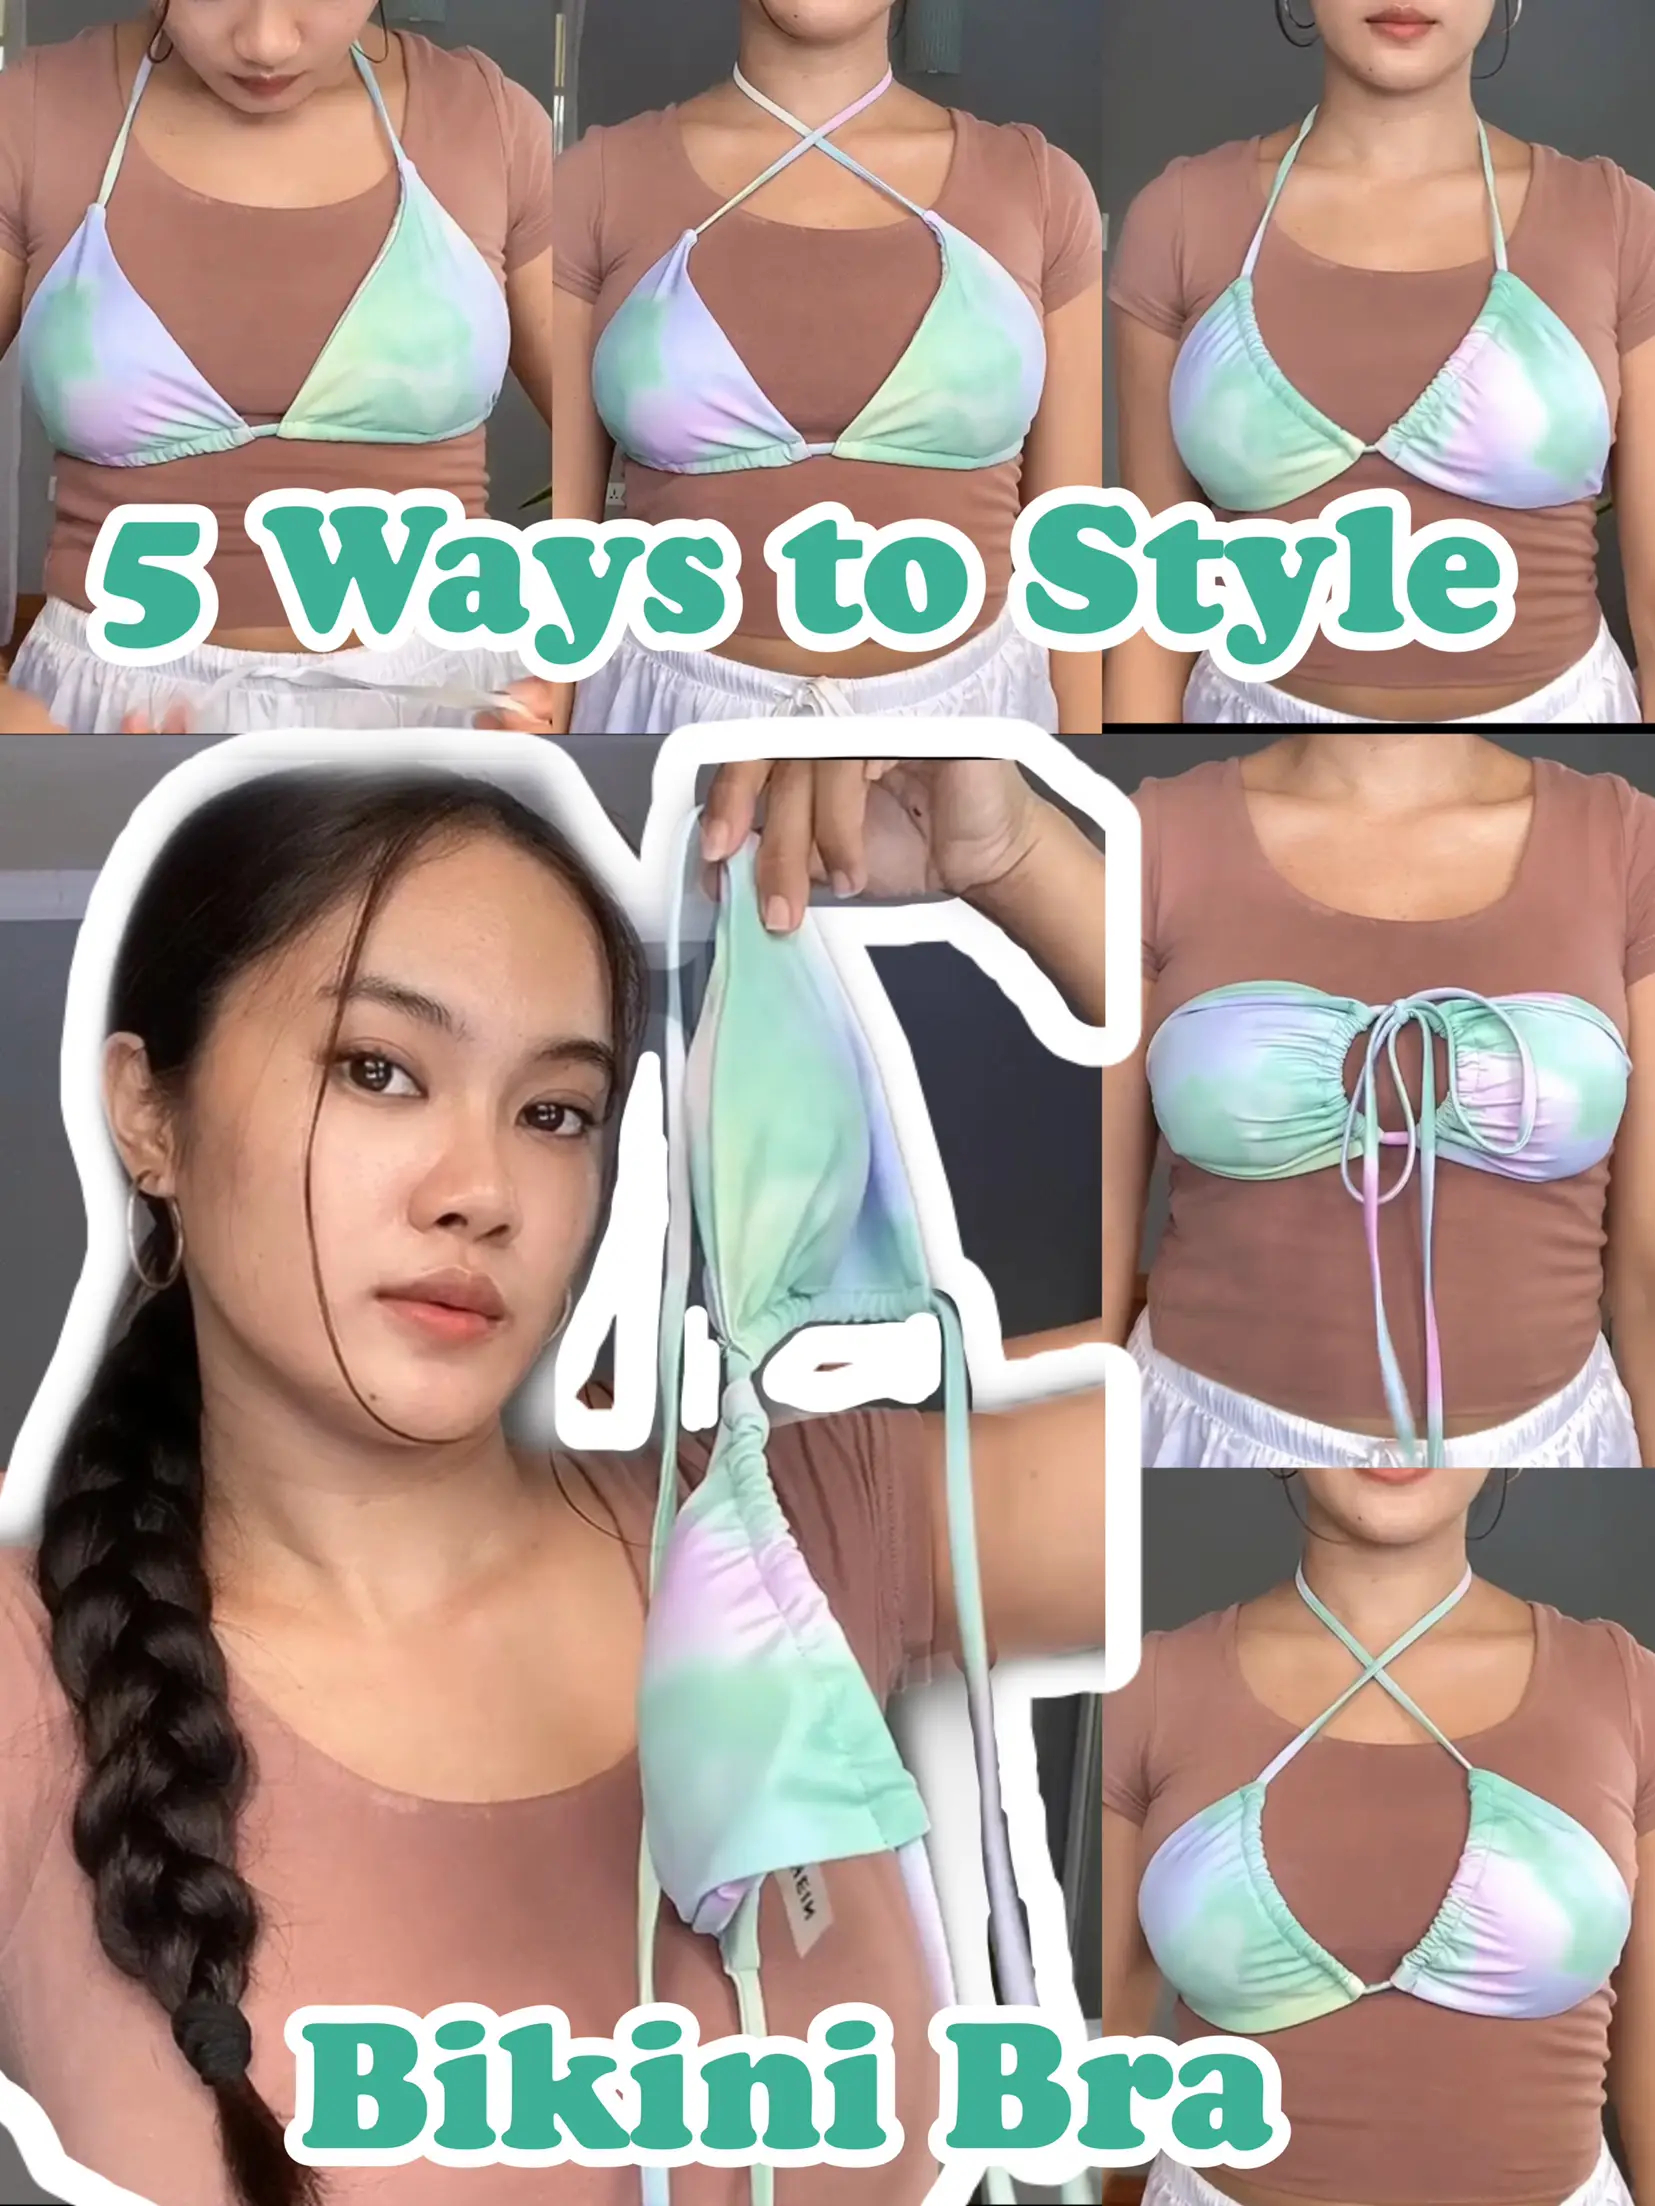 Upside down bikini, underboob, and other ways to style your swim tops